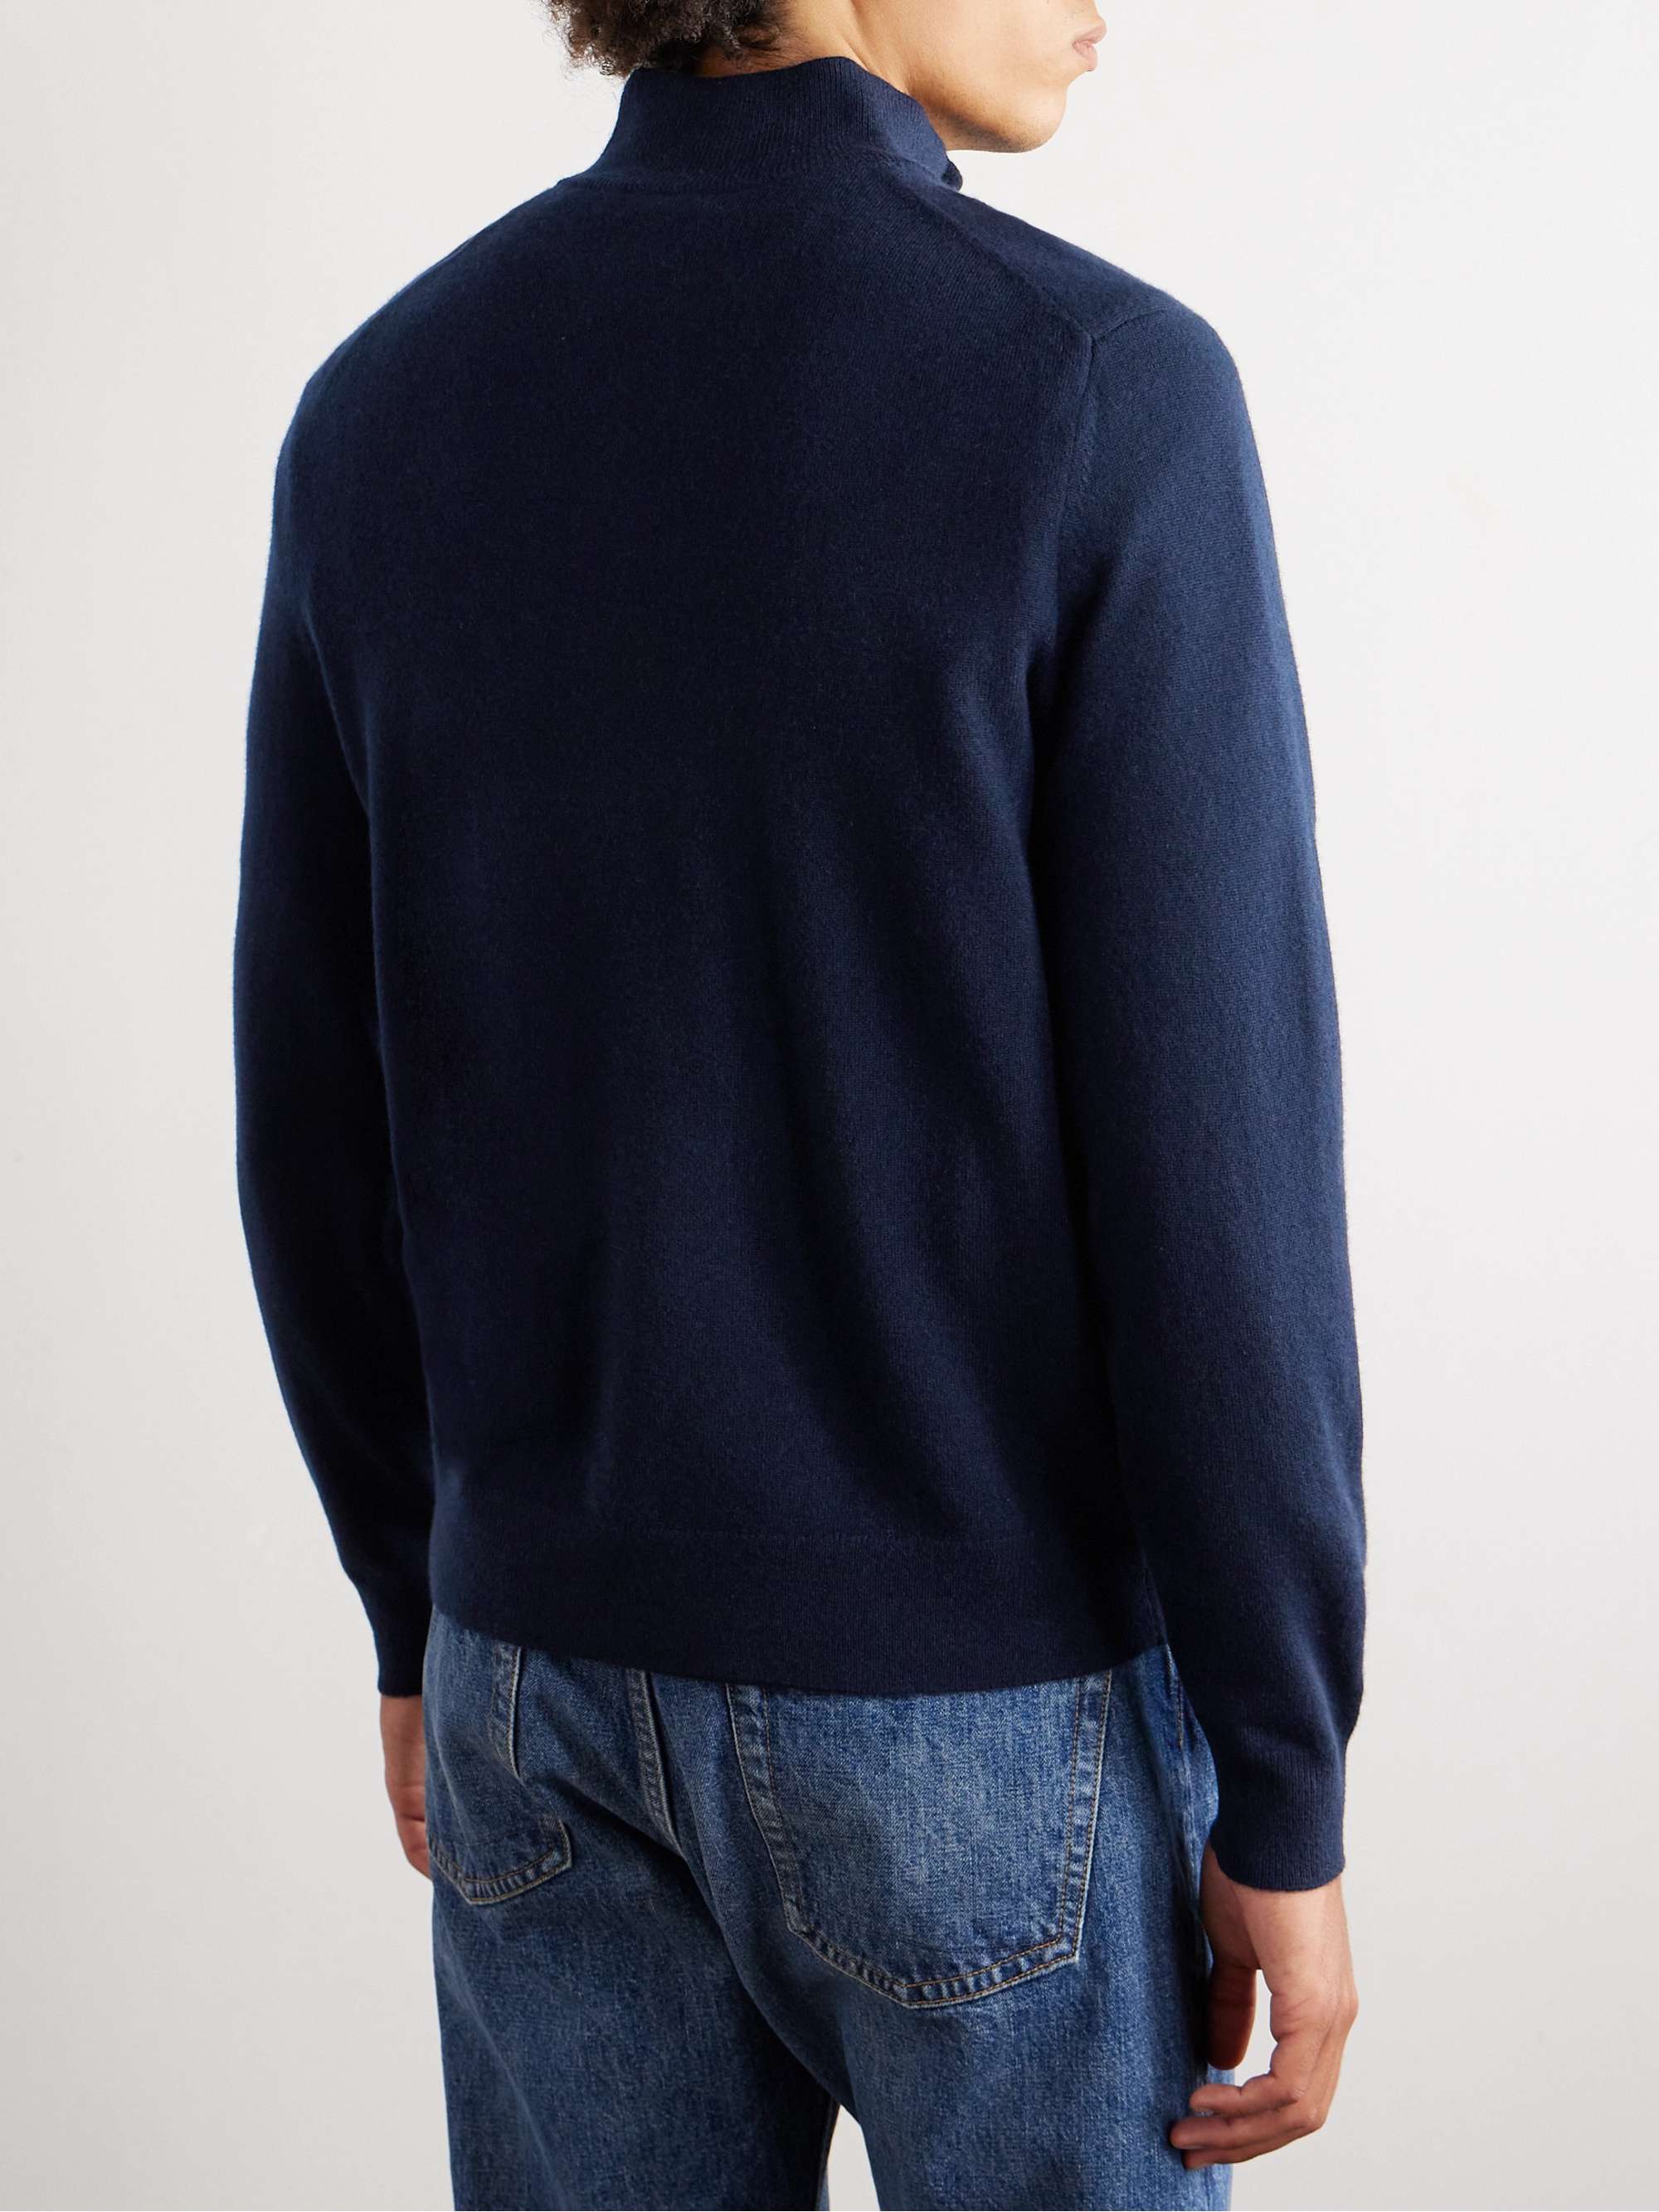 THEORY Hilles Cashmere Half-Zip Sweater for Men | MR PORTER